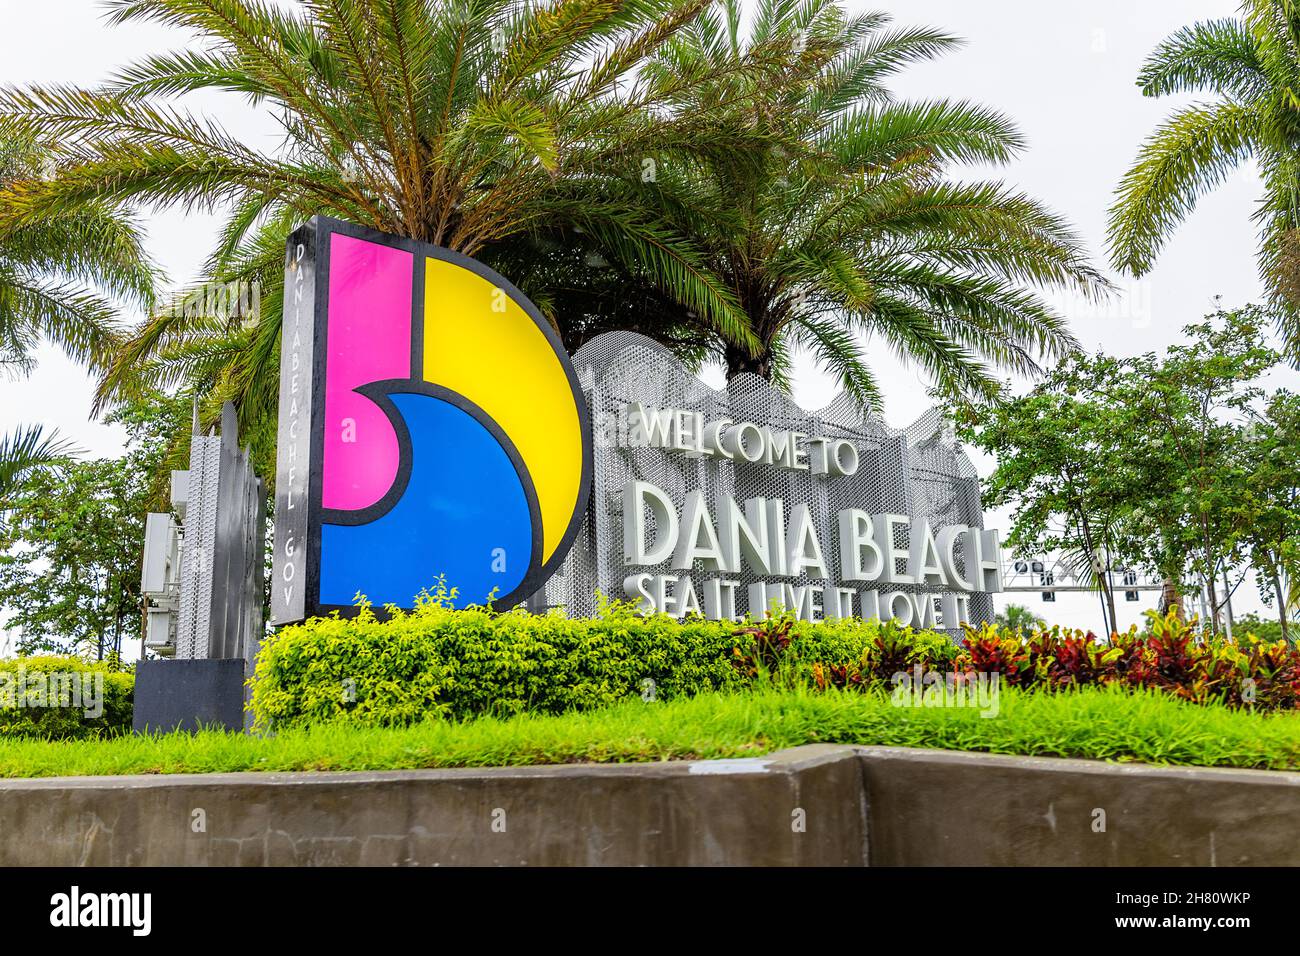 Miami, USA - July 12, 2021: Sign for Dania Beach city near Hollywood, Miami and Ft Lauderdale welcome message signage with colorful design in summer Stock Photo